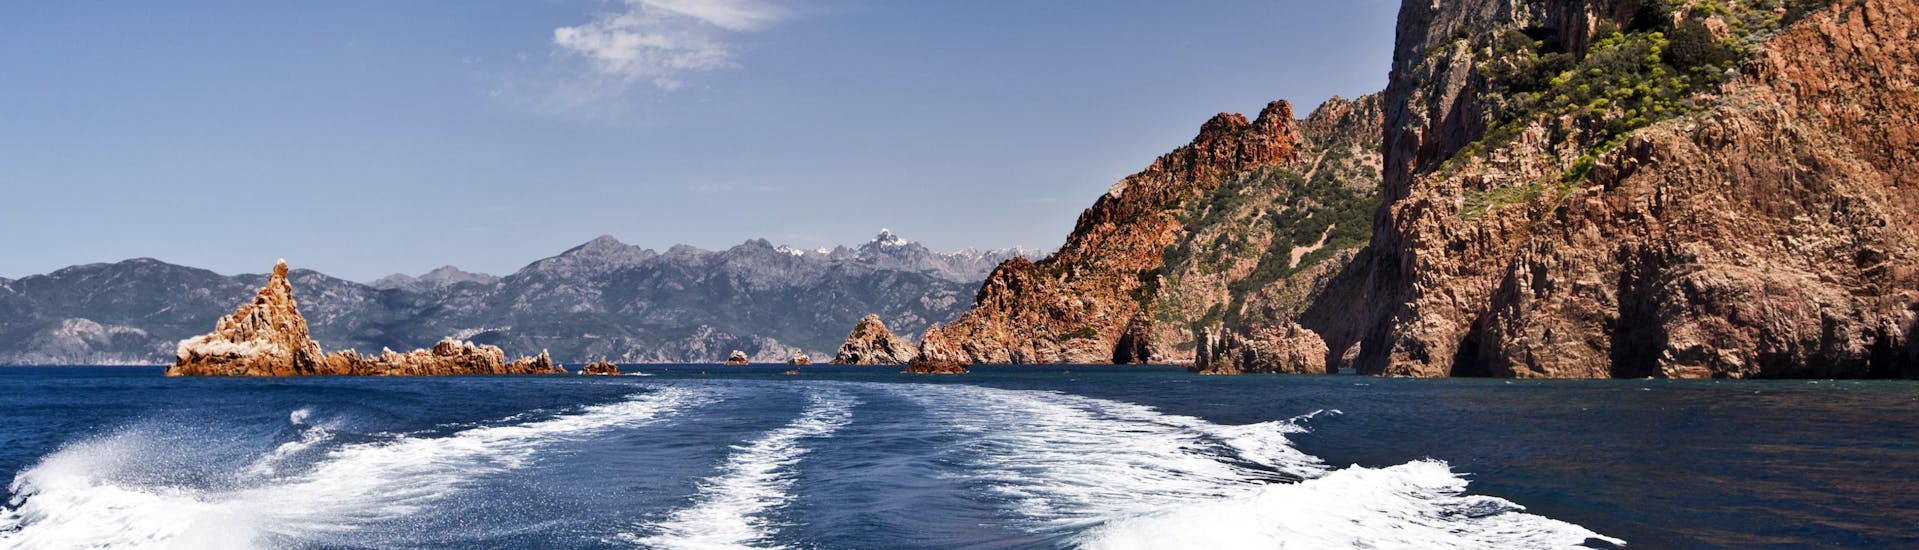 View from the back of a boat during a boat trip in the impressive Calanques de Piana on the west coast of Corsica.